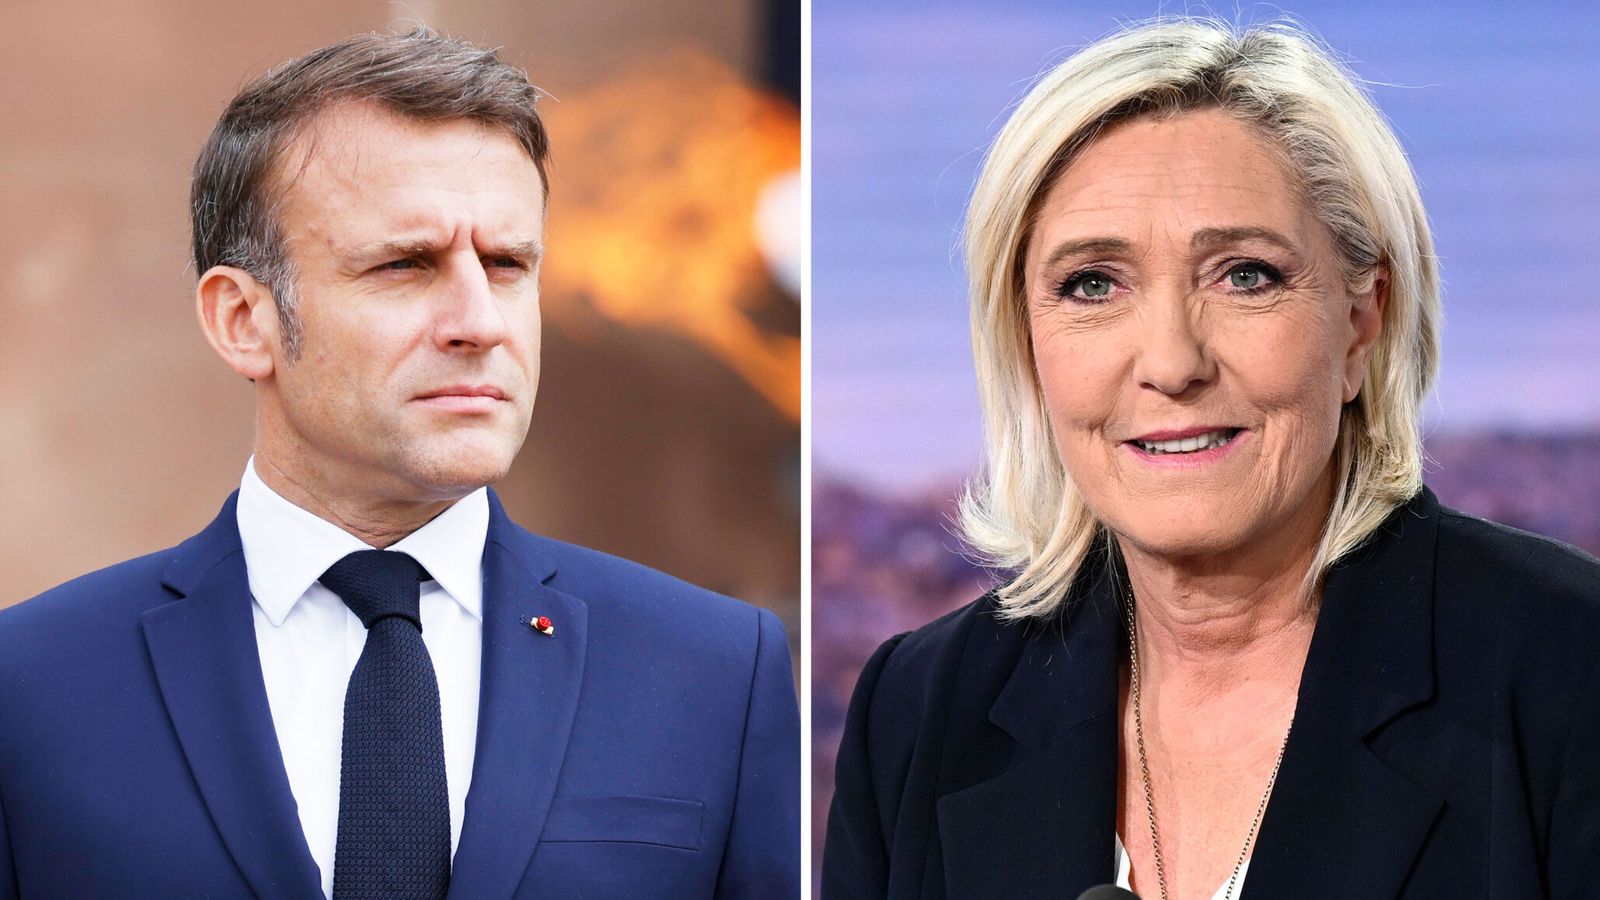 France votes in snap election that could make history